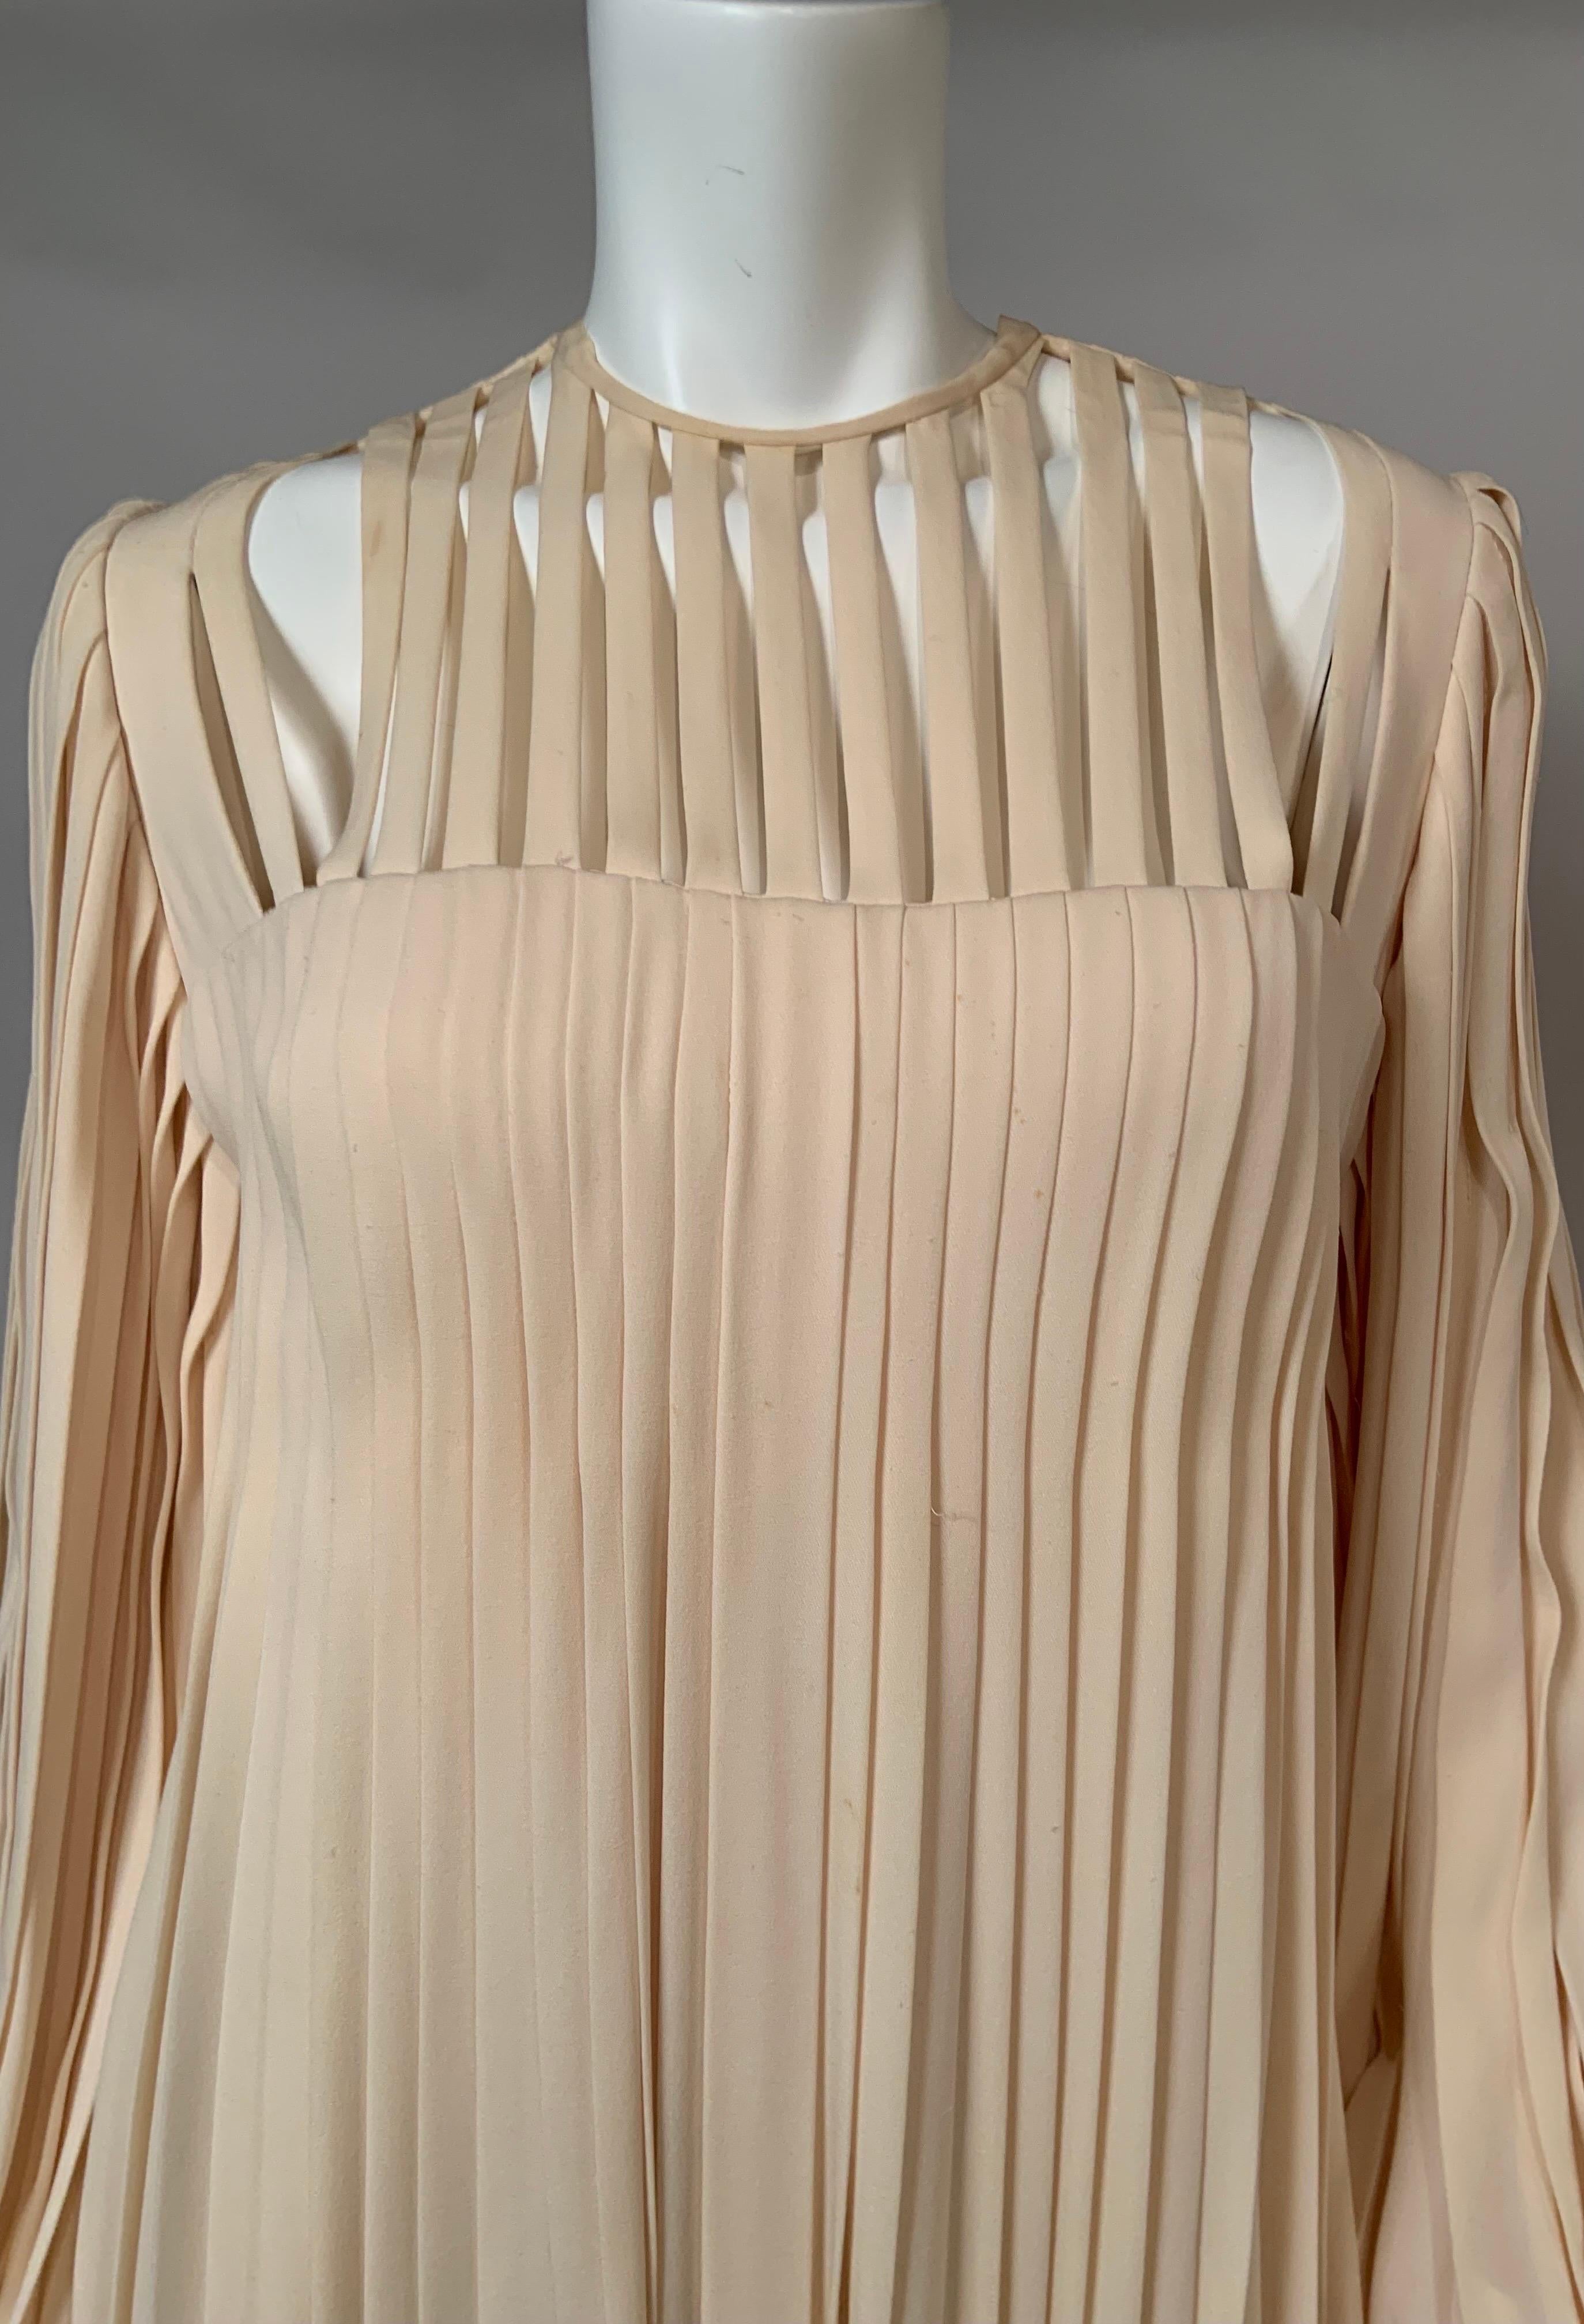 James Galanos designed this unusual pleated dress using ivory silk crepe. The dress has a very interesting bodice with evenly spaced bands of the fabric revealing the skin of the wearer above a pleated dress.  The long sleeves are fully pleated and